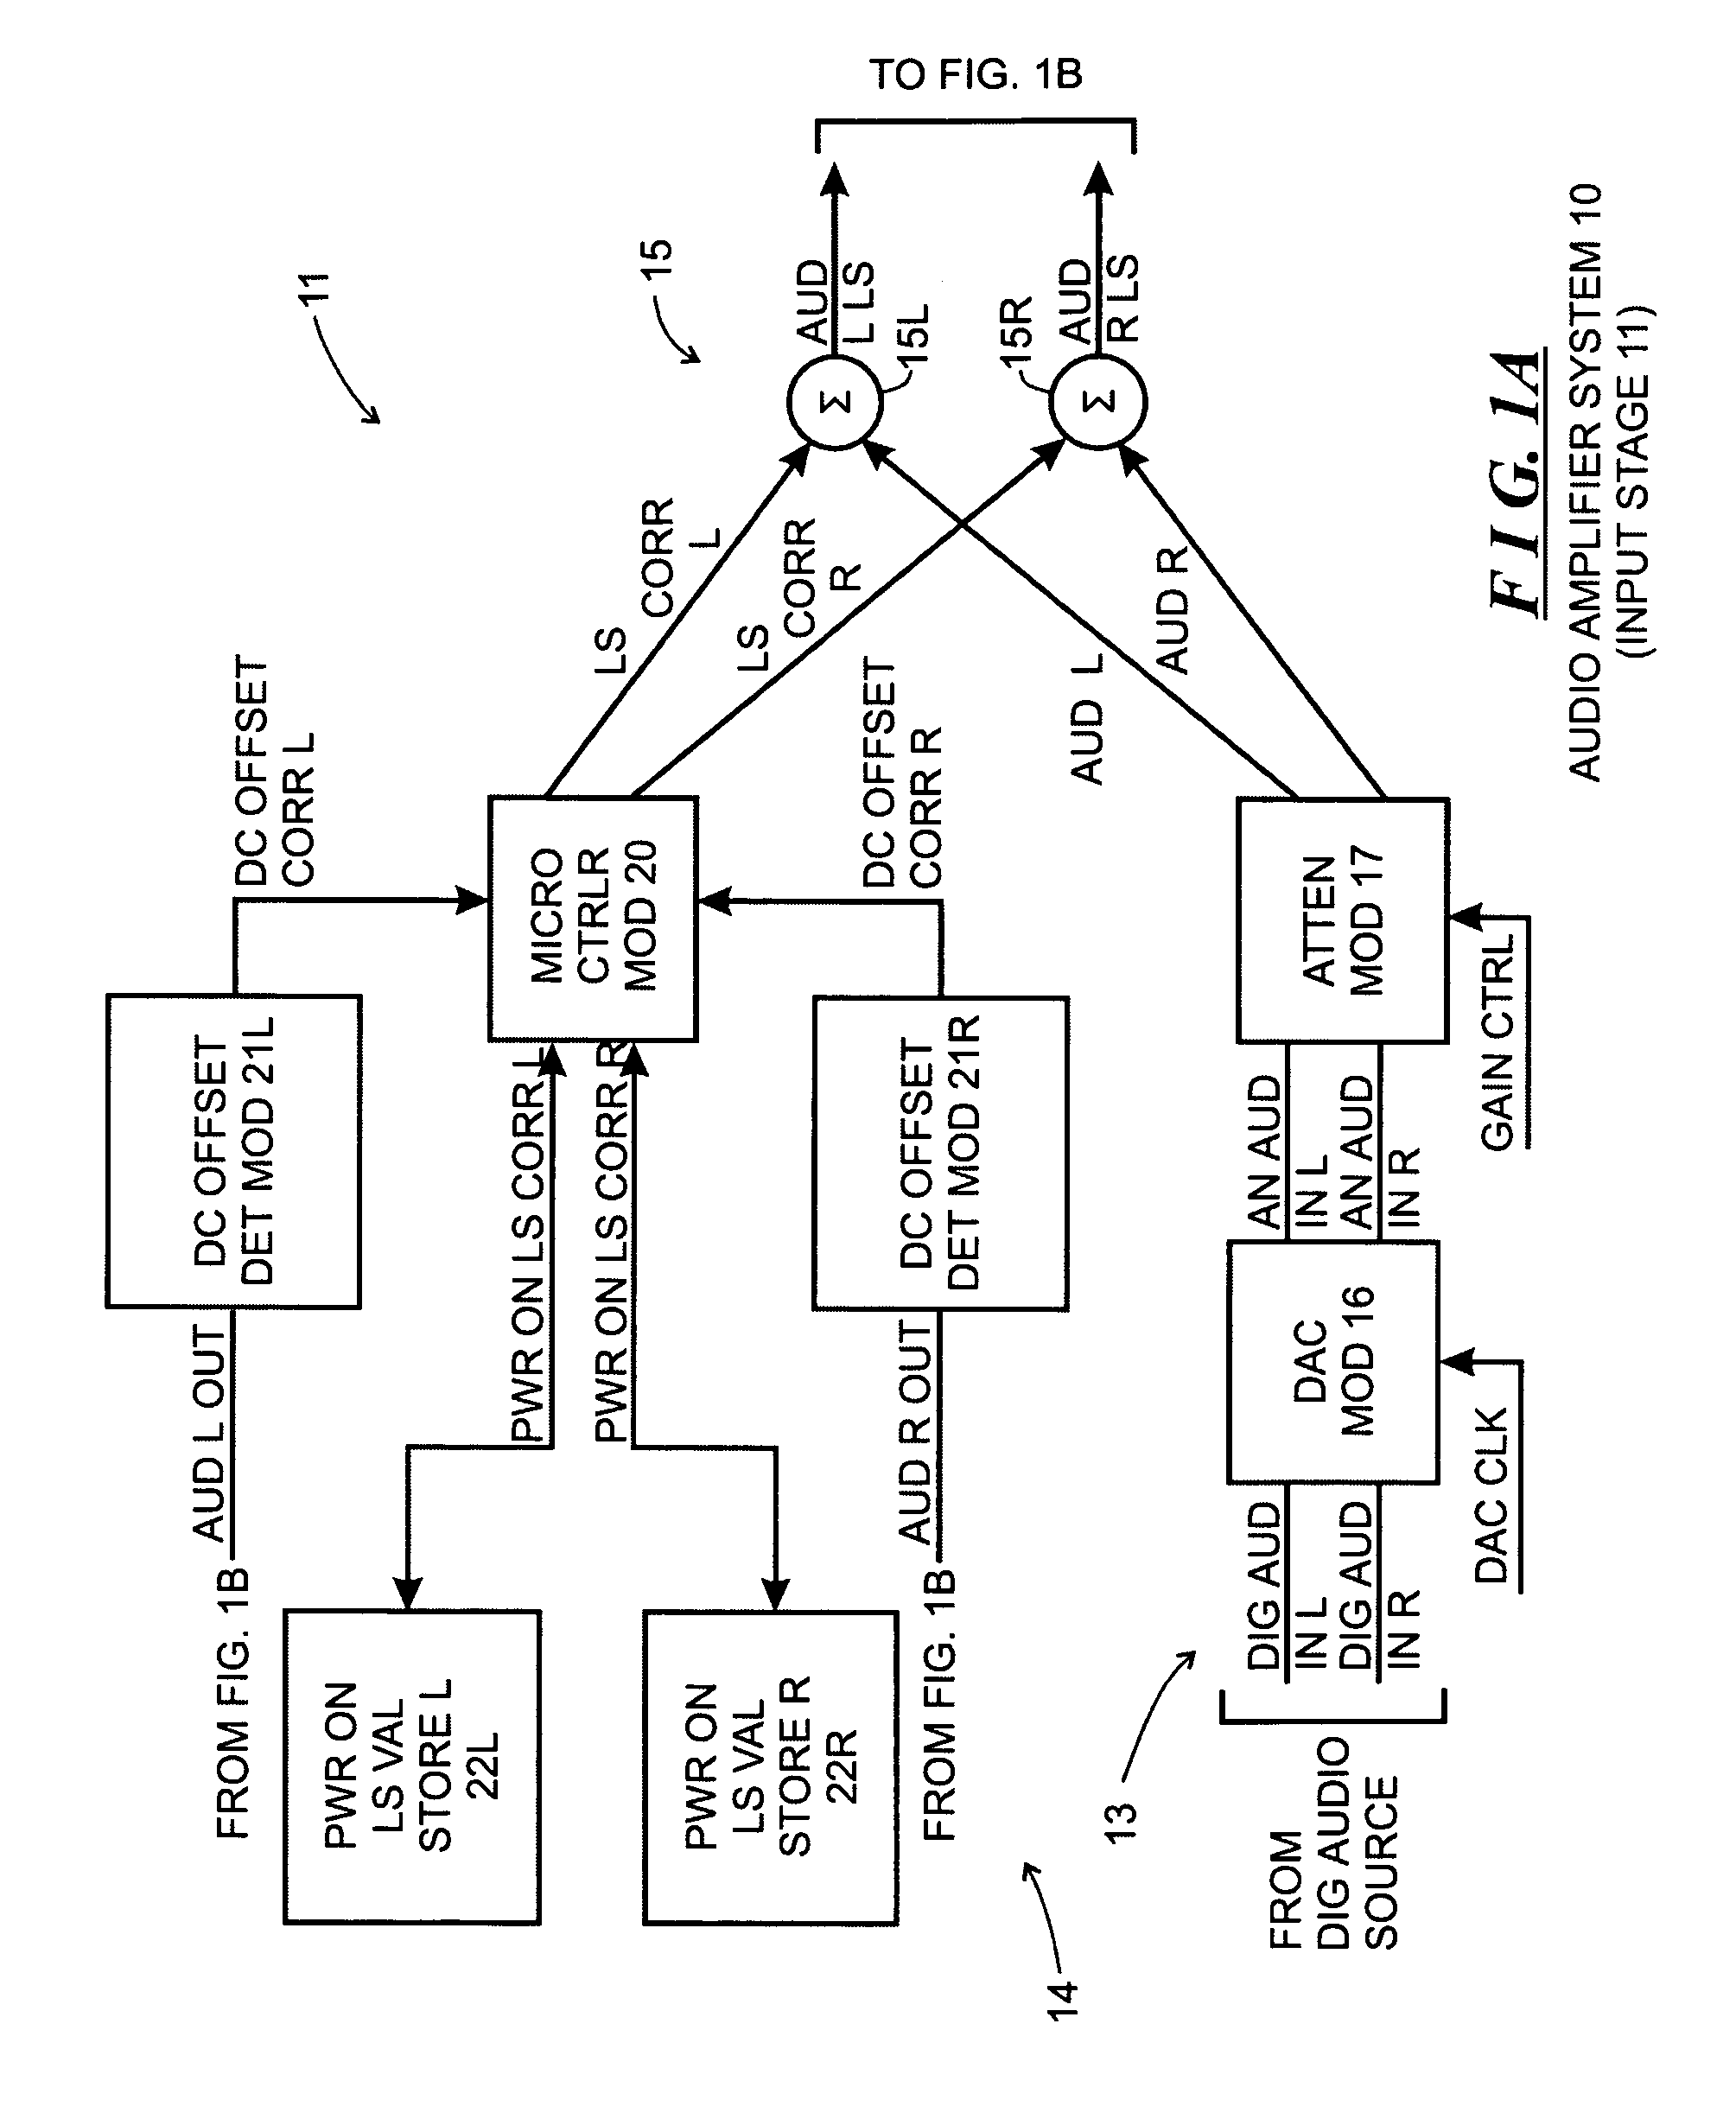 System and method for minimizing DC offset in outputs of audio power amplifiers